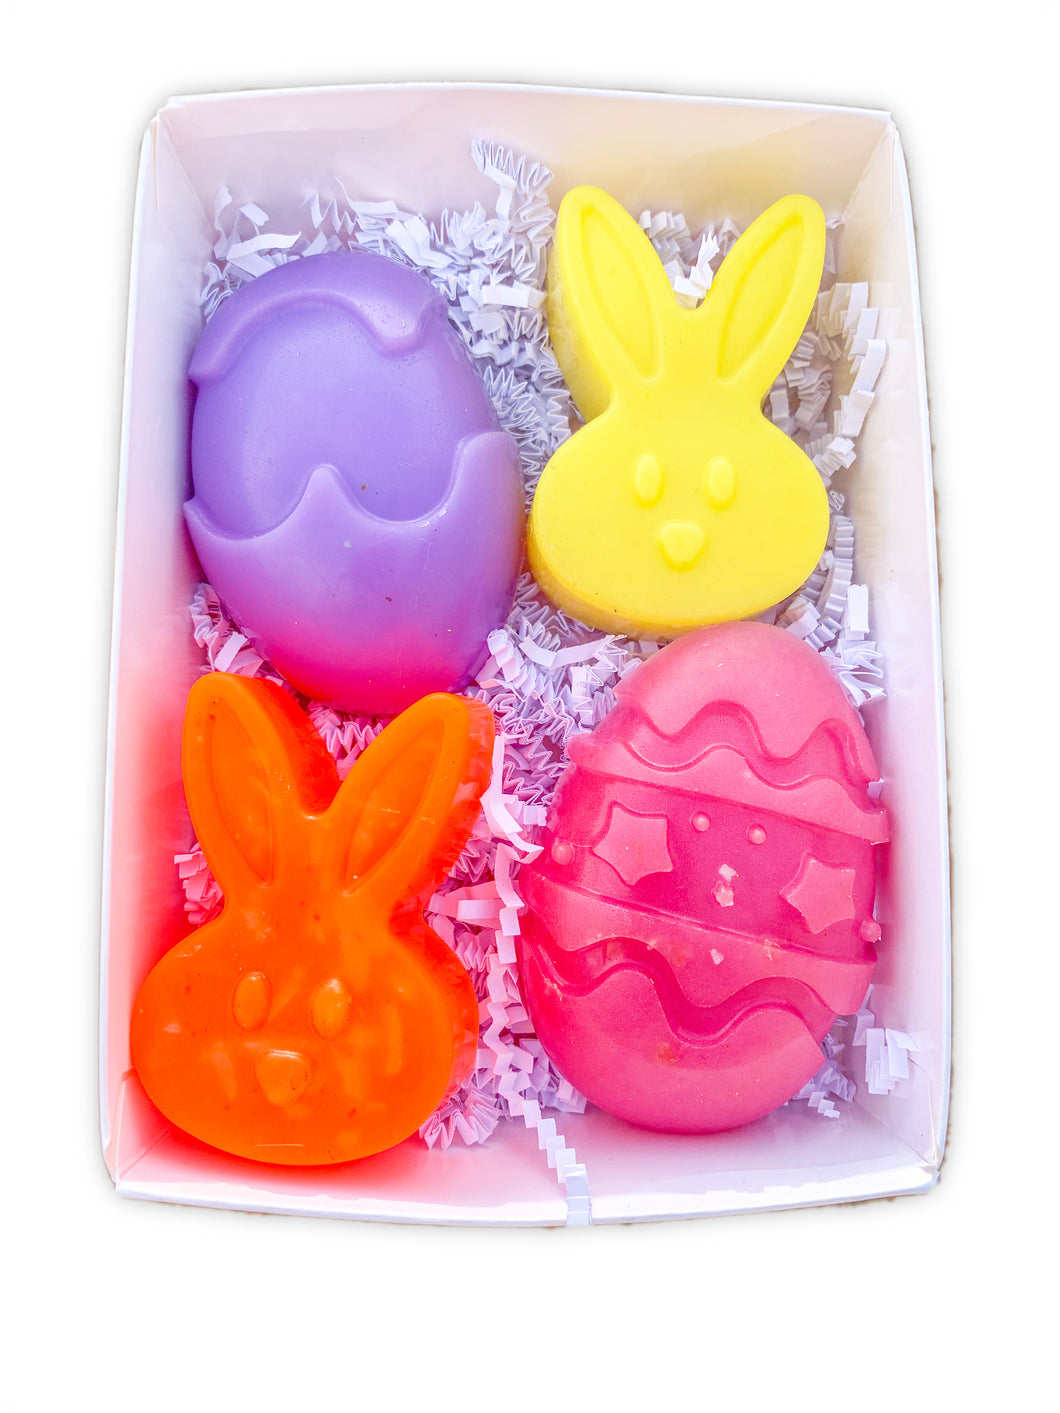 Easter Bunny and Egg Natural Soaps Gift Set with Coconut Milk and Four Different Scents By Youstina Naturals (Ester Soap Set 2)